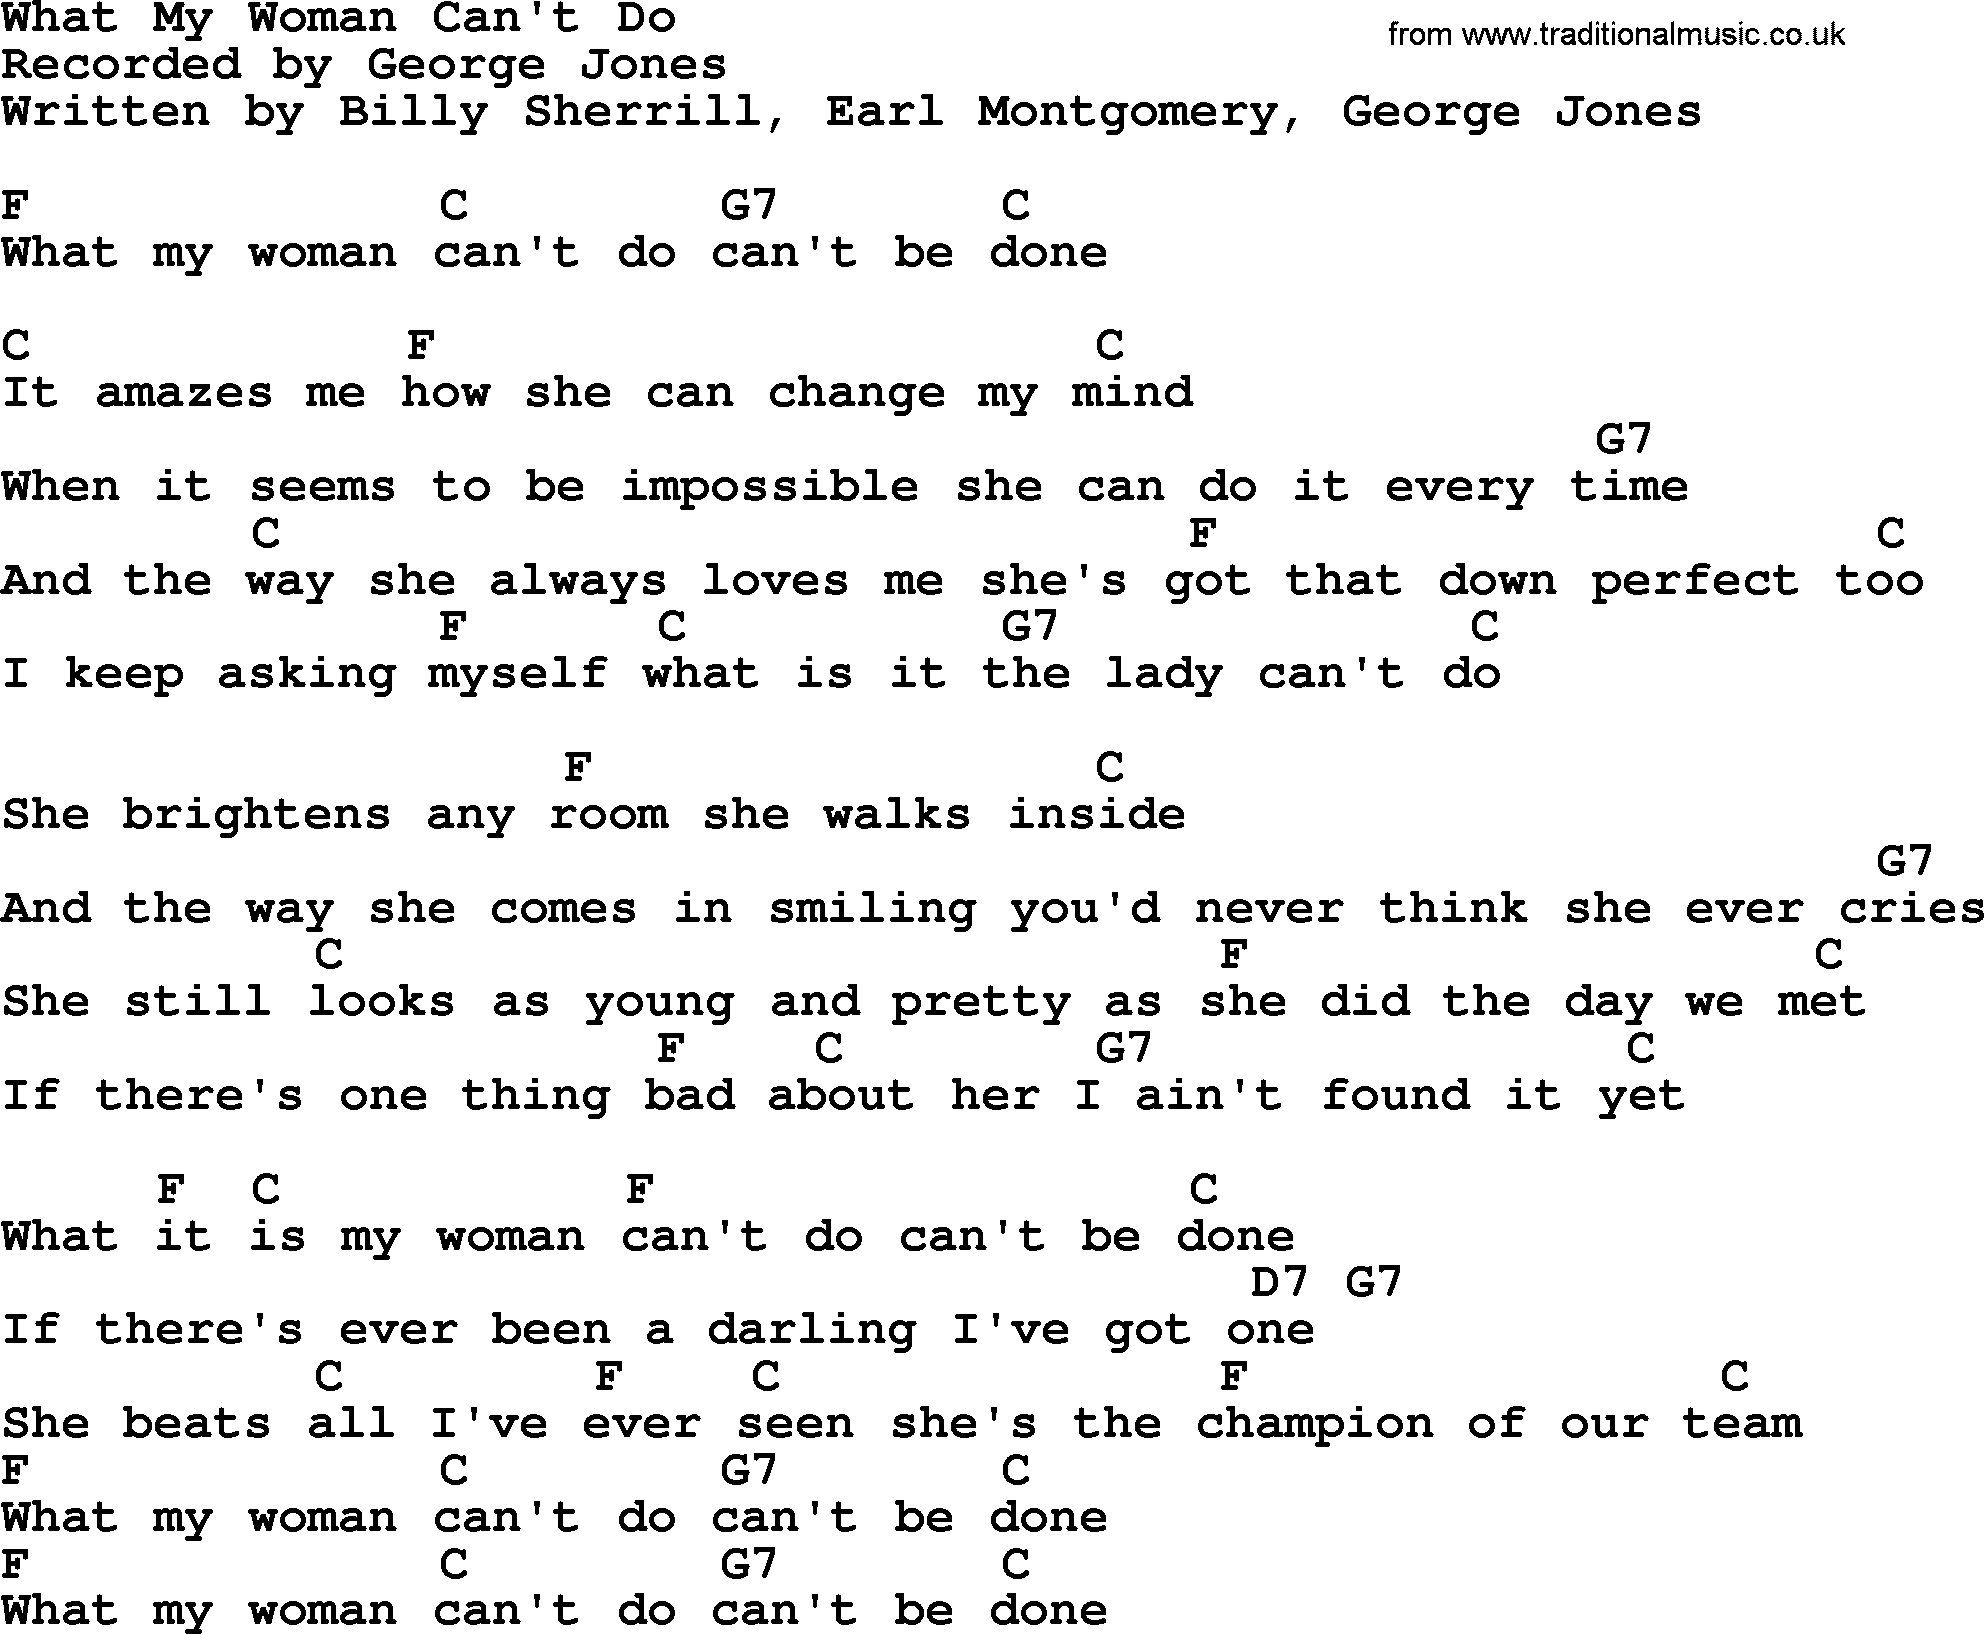 George Jones song: What My Woman Can't Do, lyrics and chords